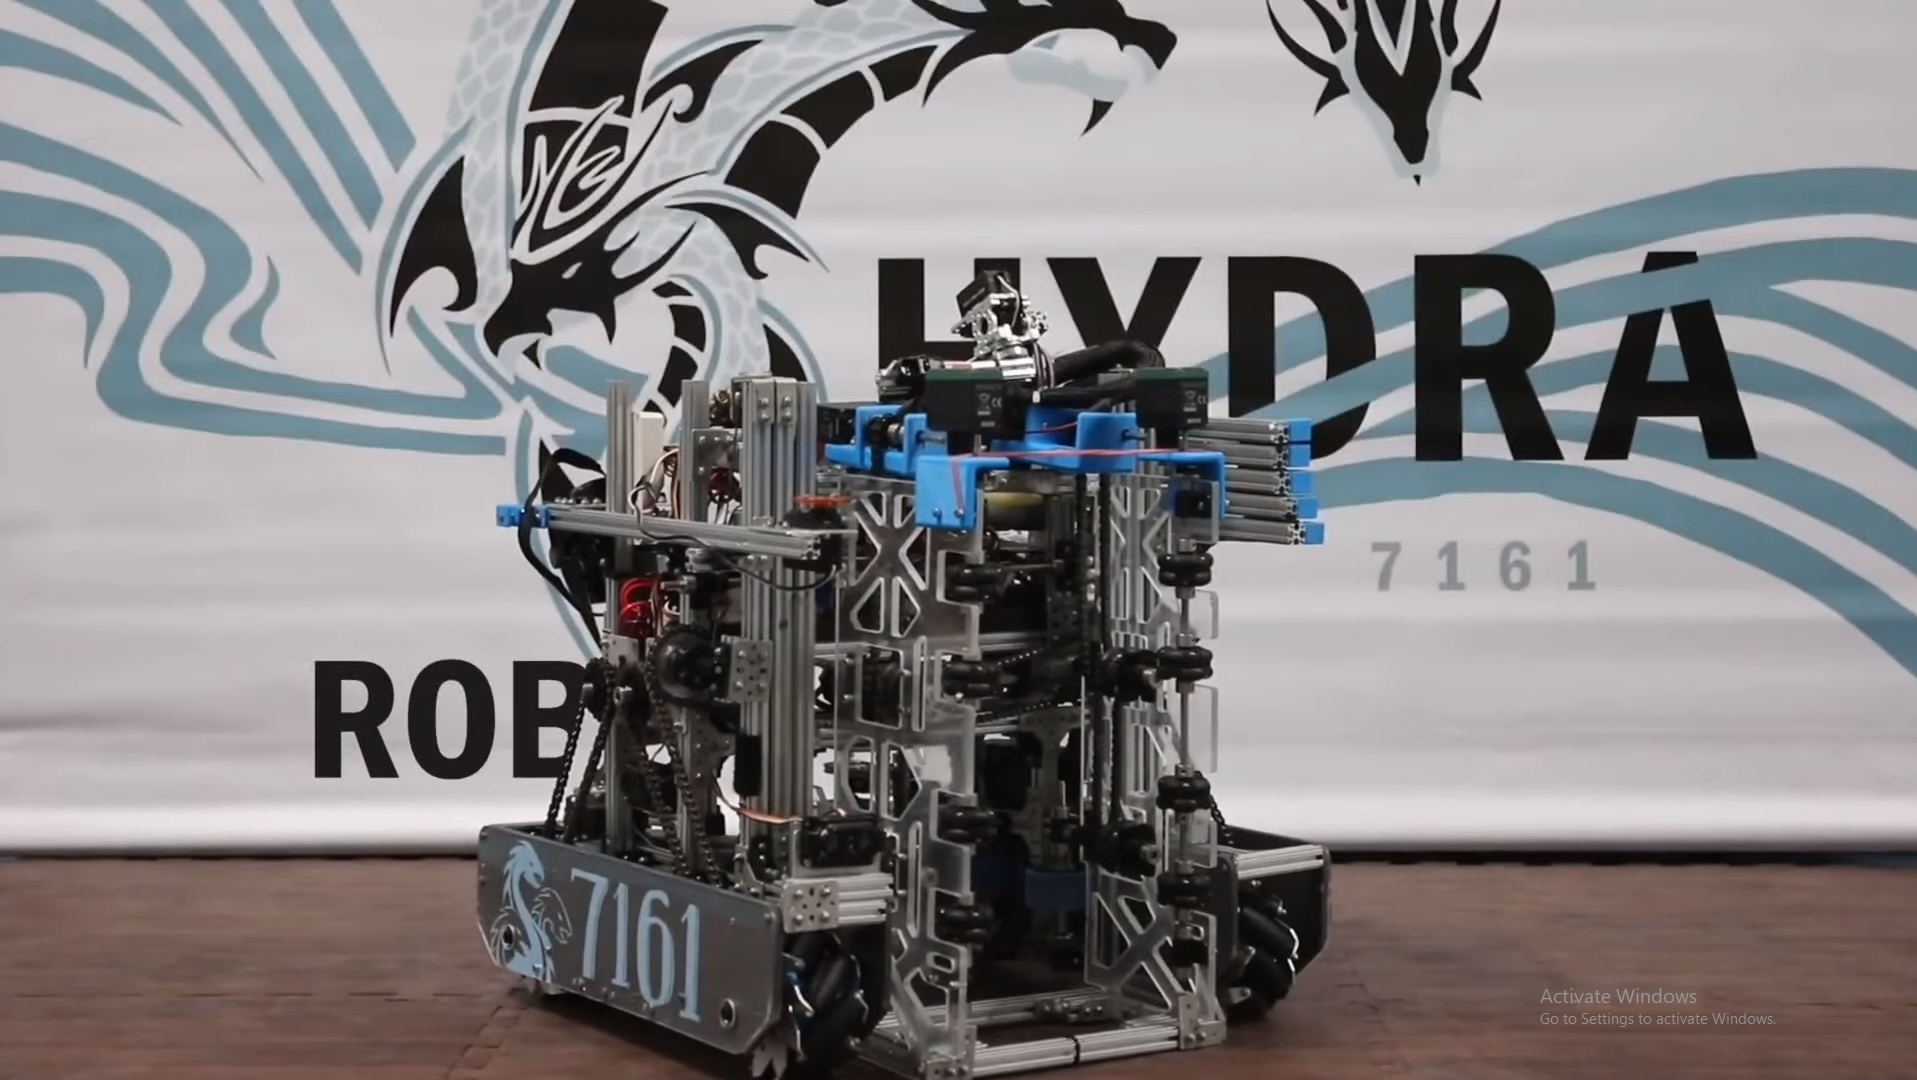 7161 ViperBots Hydra's Relic Recovery robot